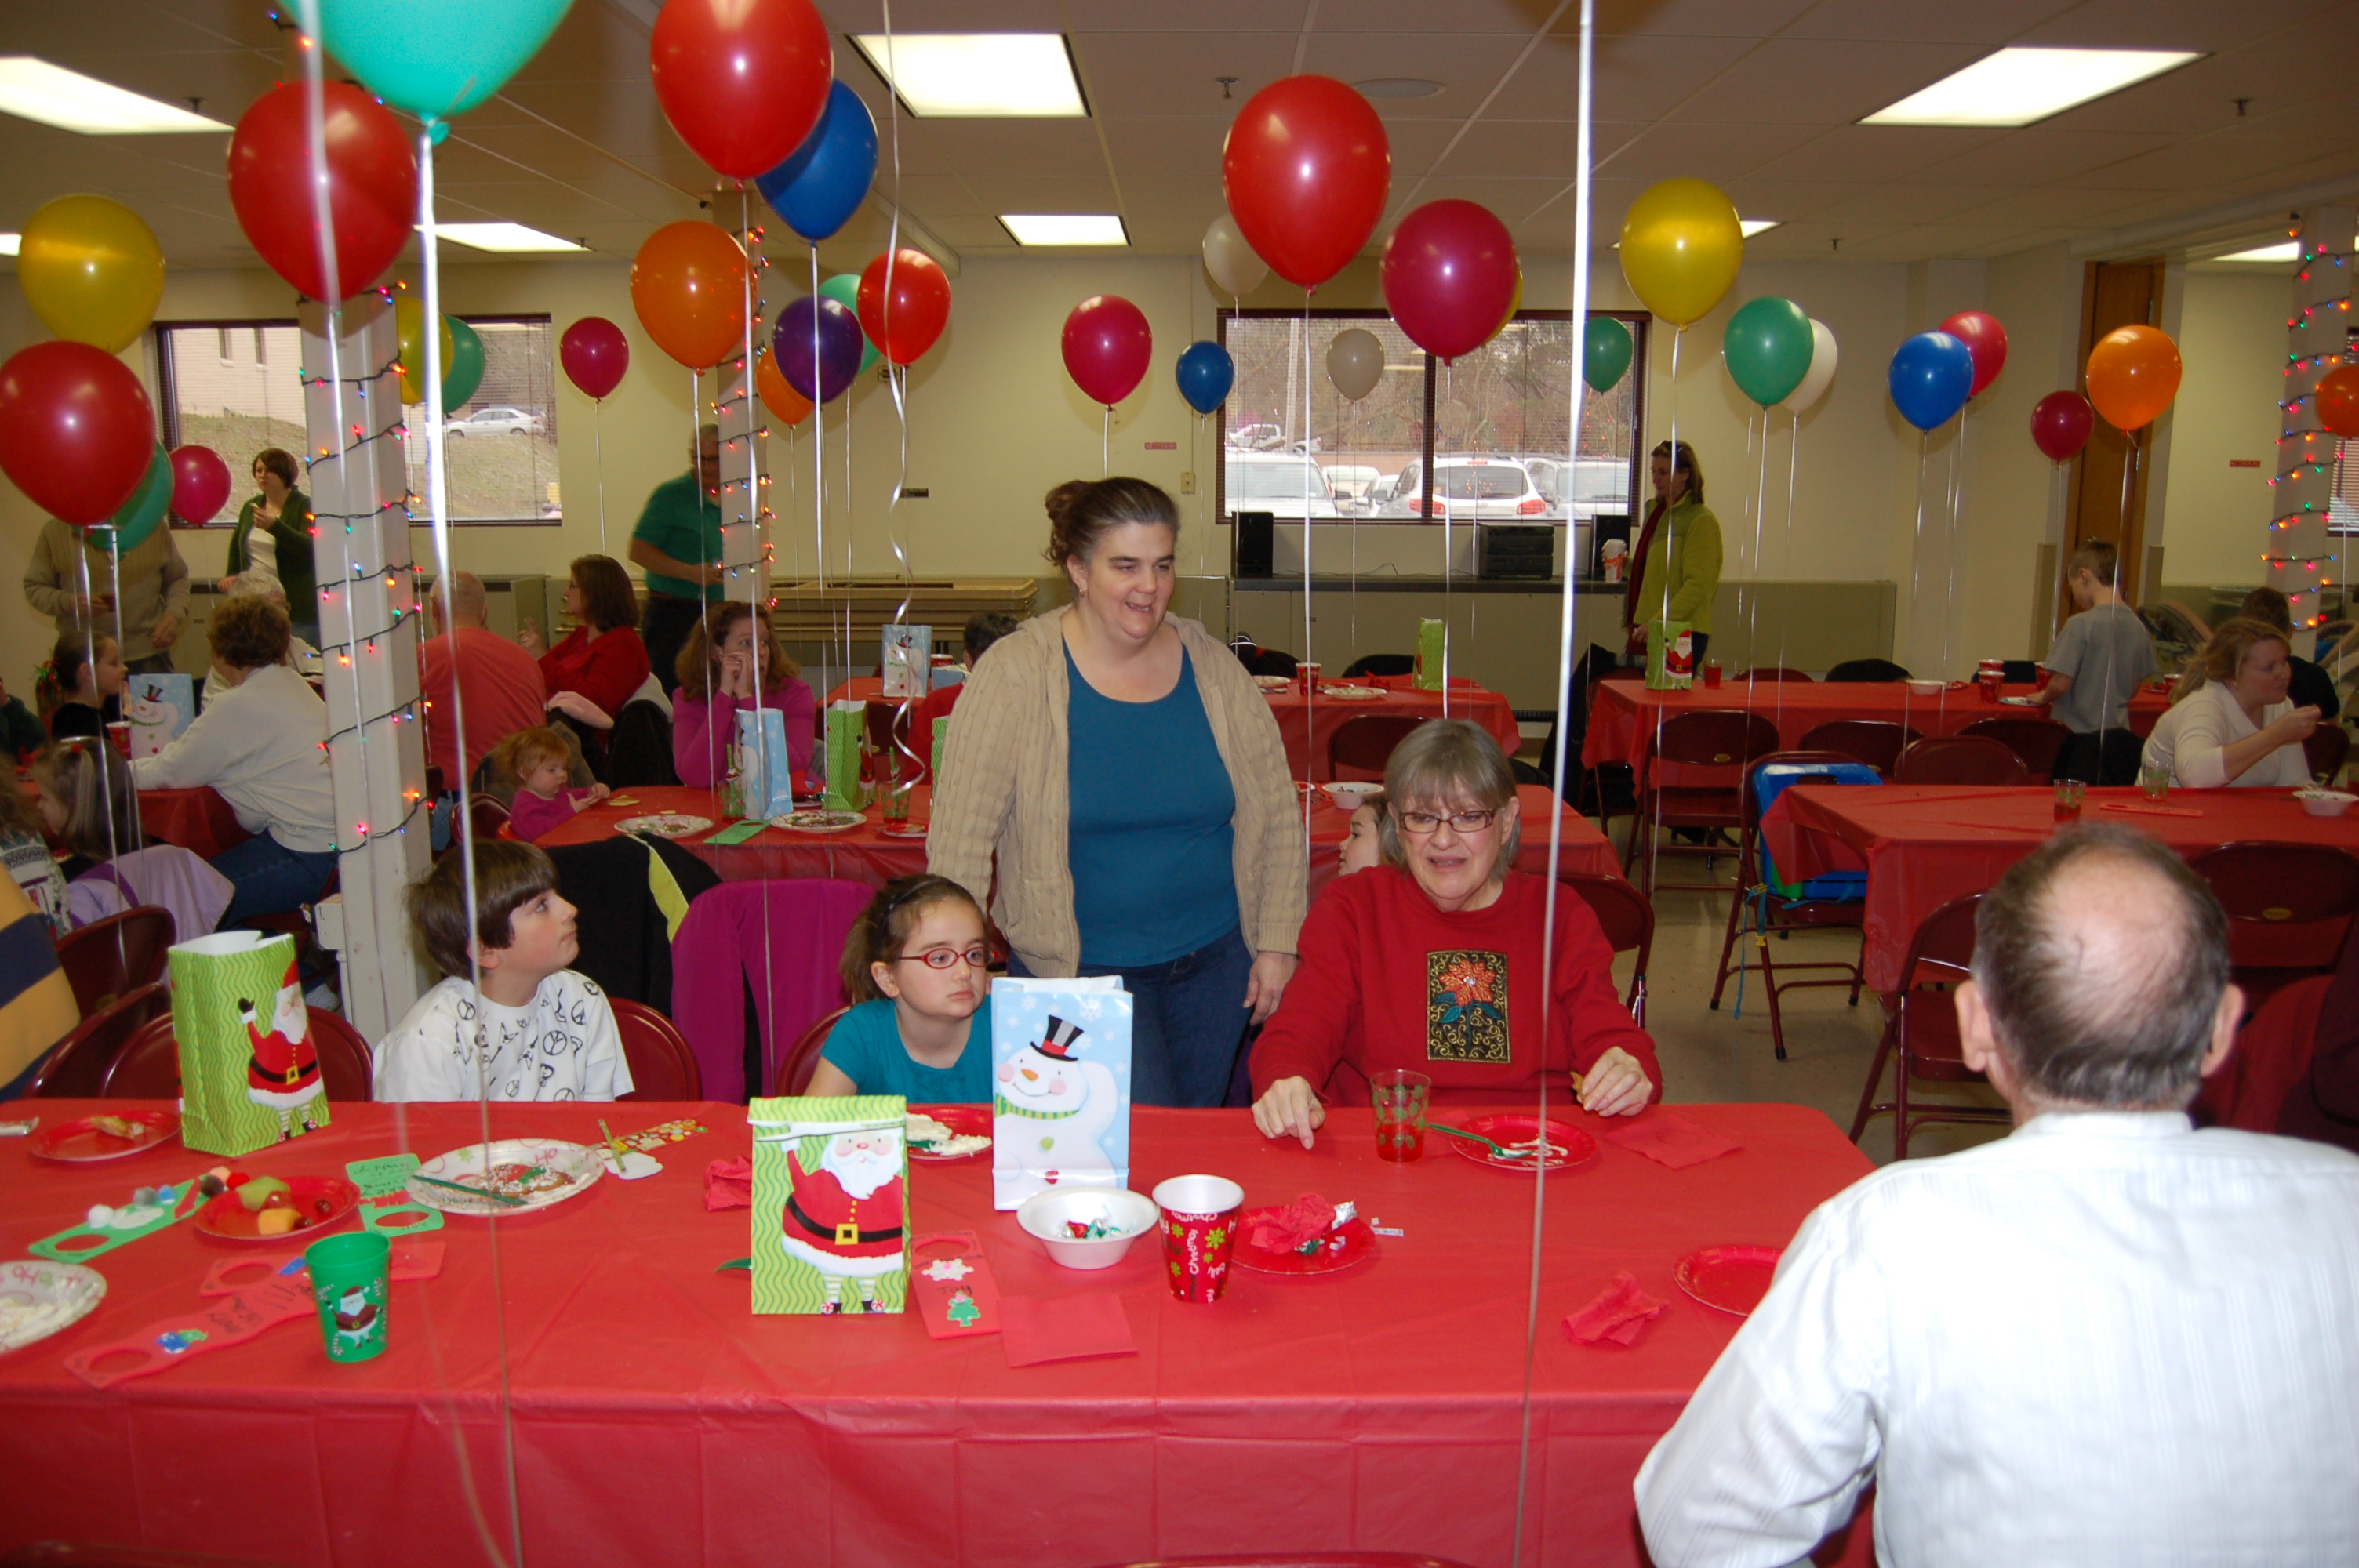 12-17-11  Other - Childrens Christmas Party